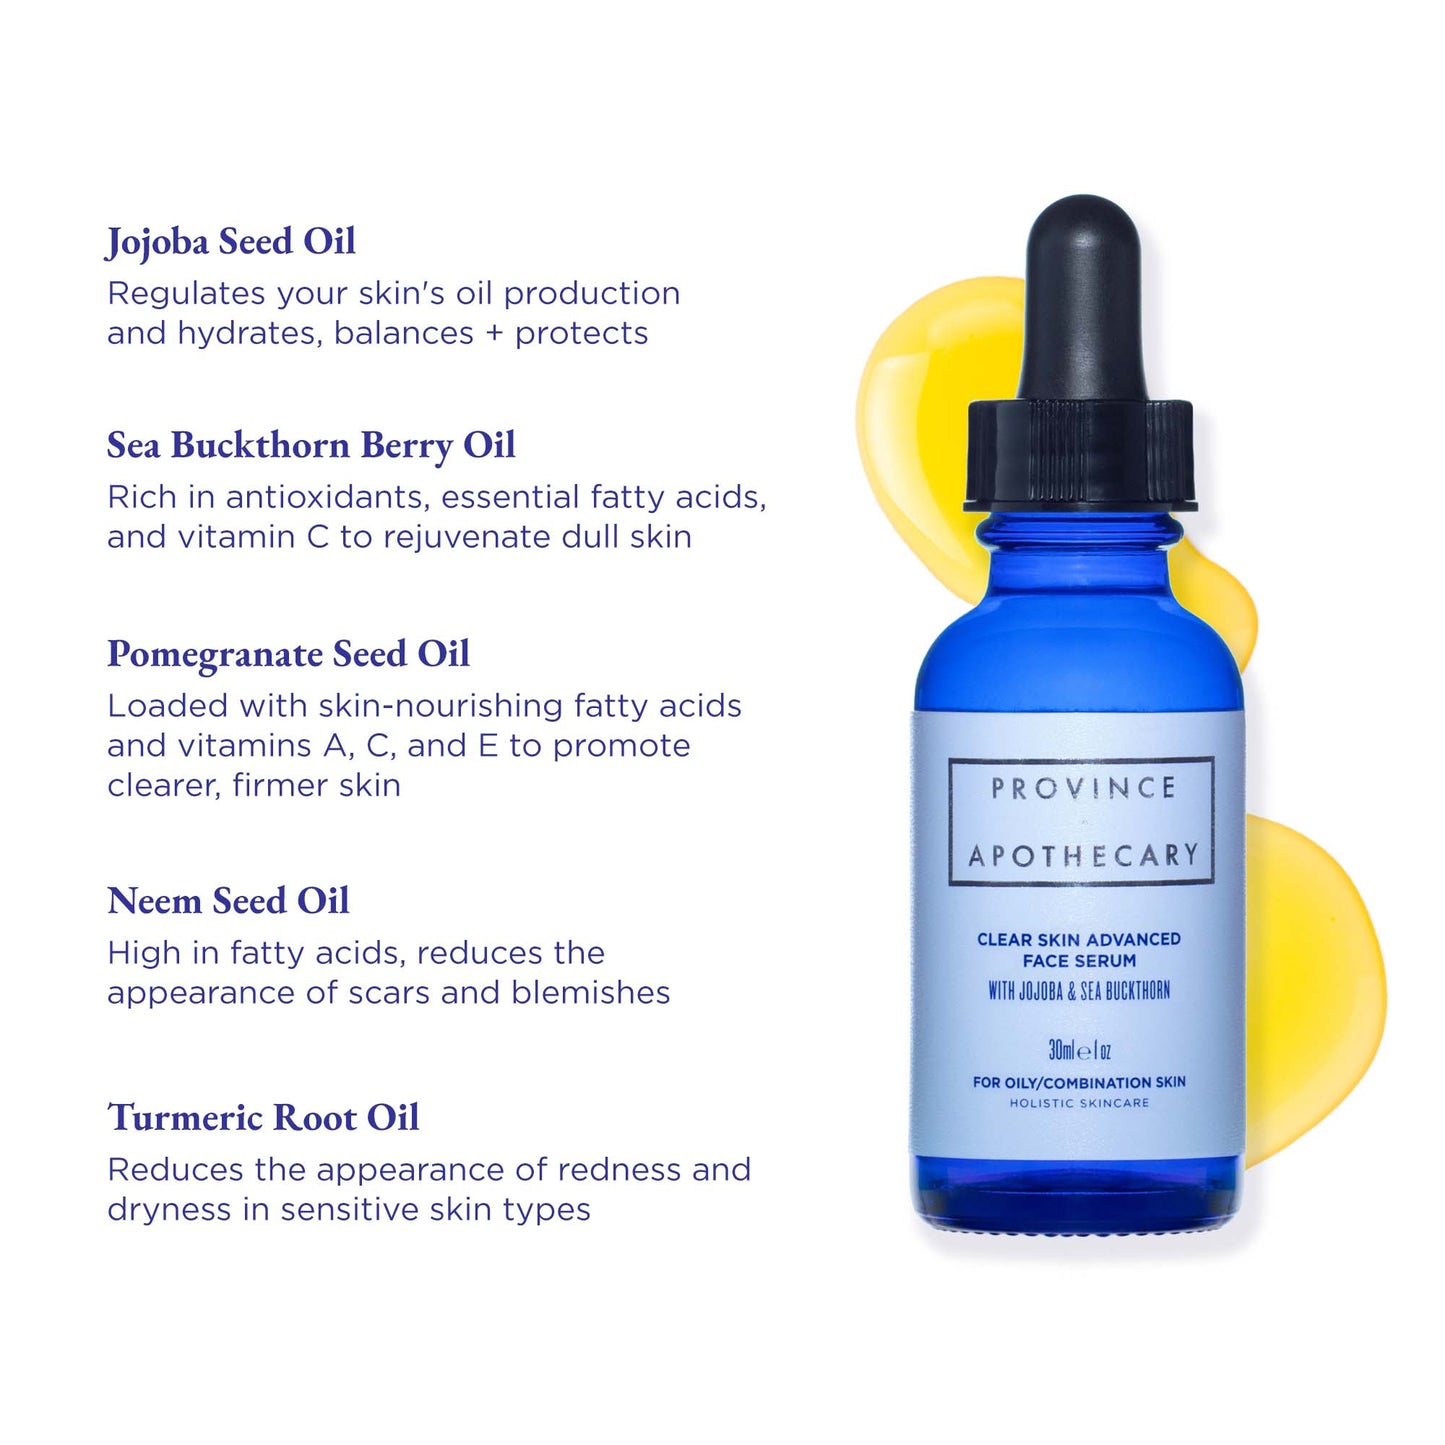 Province Apothecary Clear Skin Advanced Serum 7ml